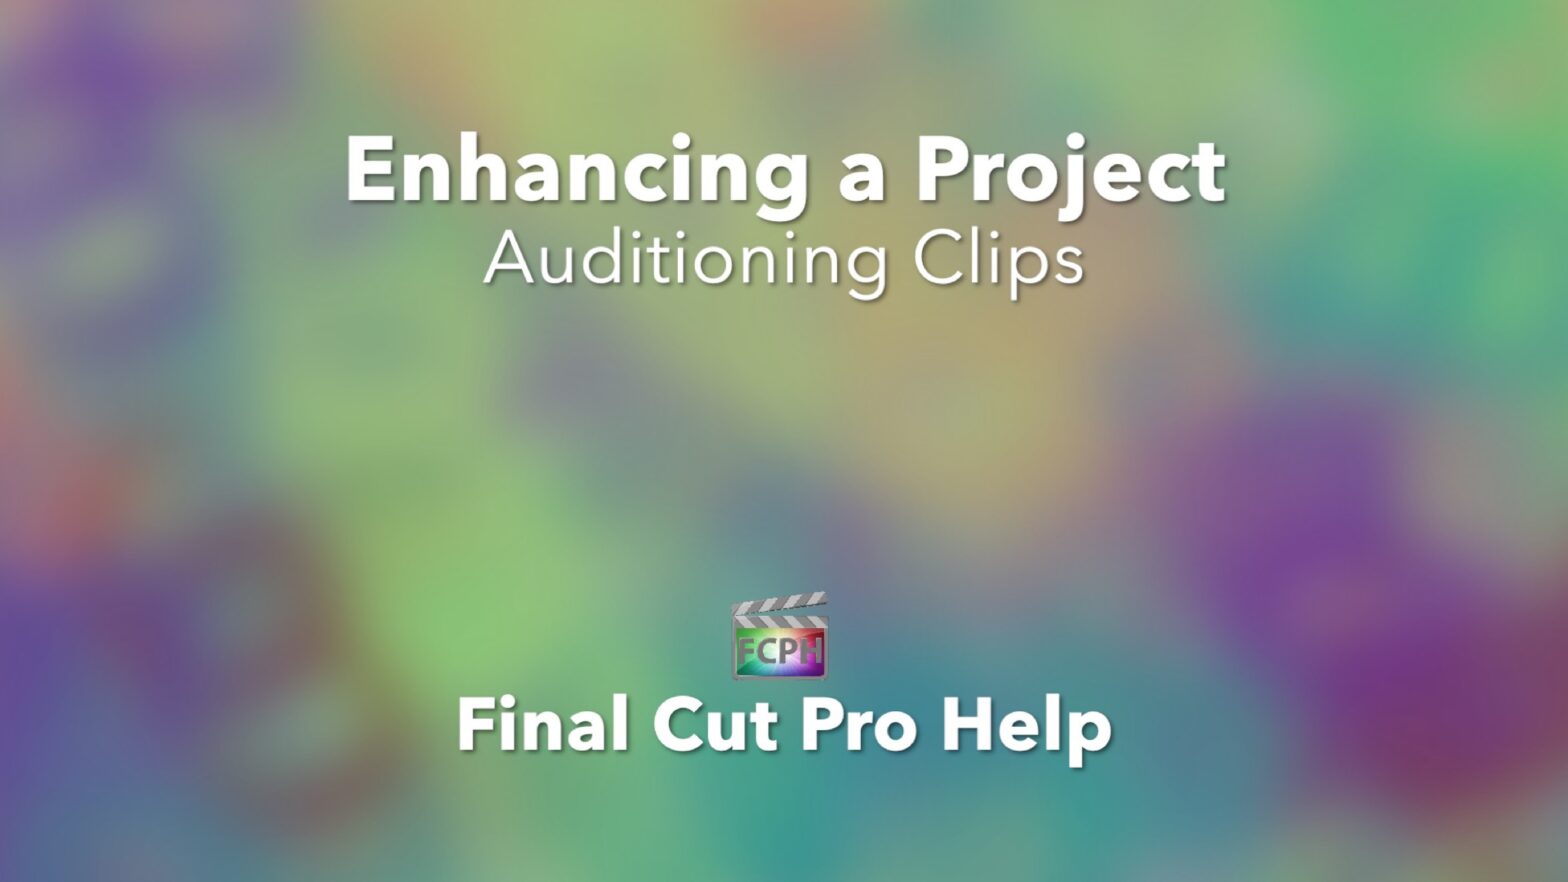 Enhancing a Project Auditioning Clips